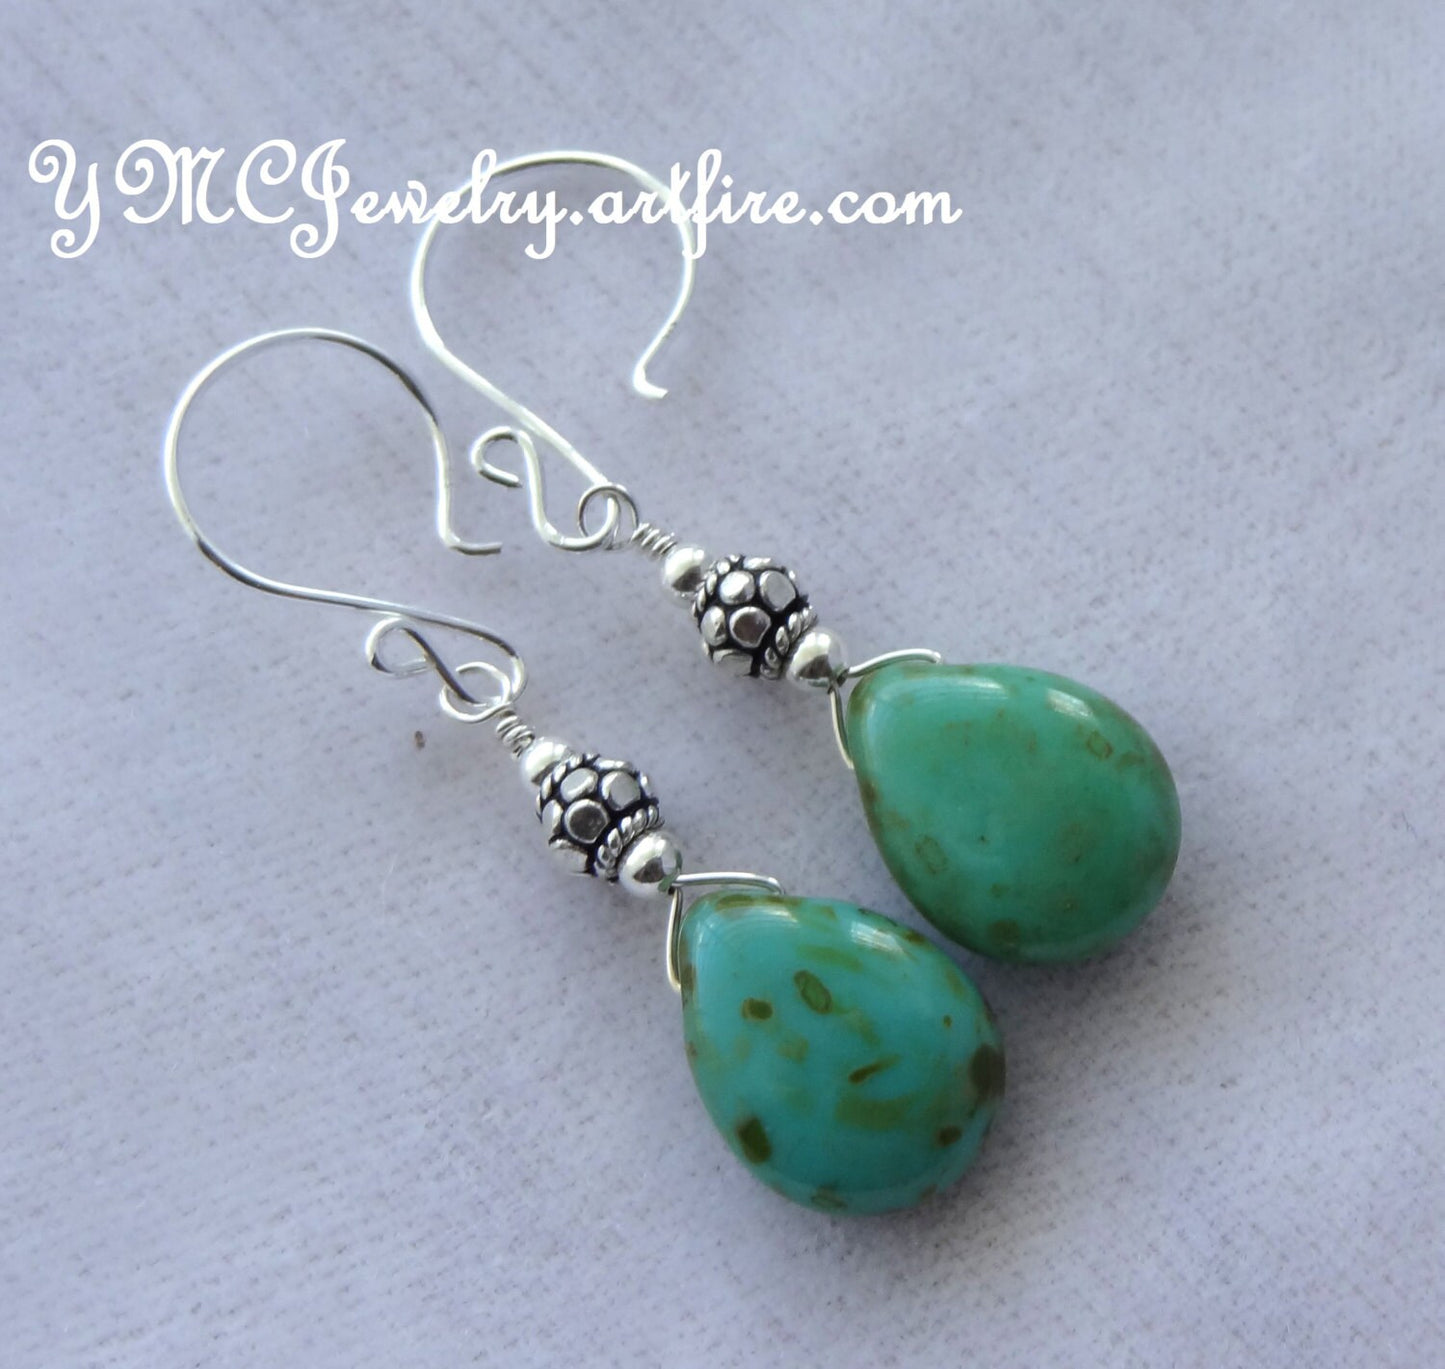 Turquoise Briolettes Glass Earrings, Turquoise Earrings, Mother of the Bride, Mother of the Groom, Sterling Silver Turquoise Earrings